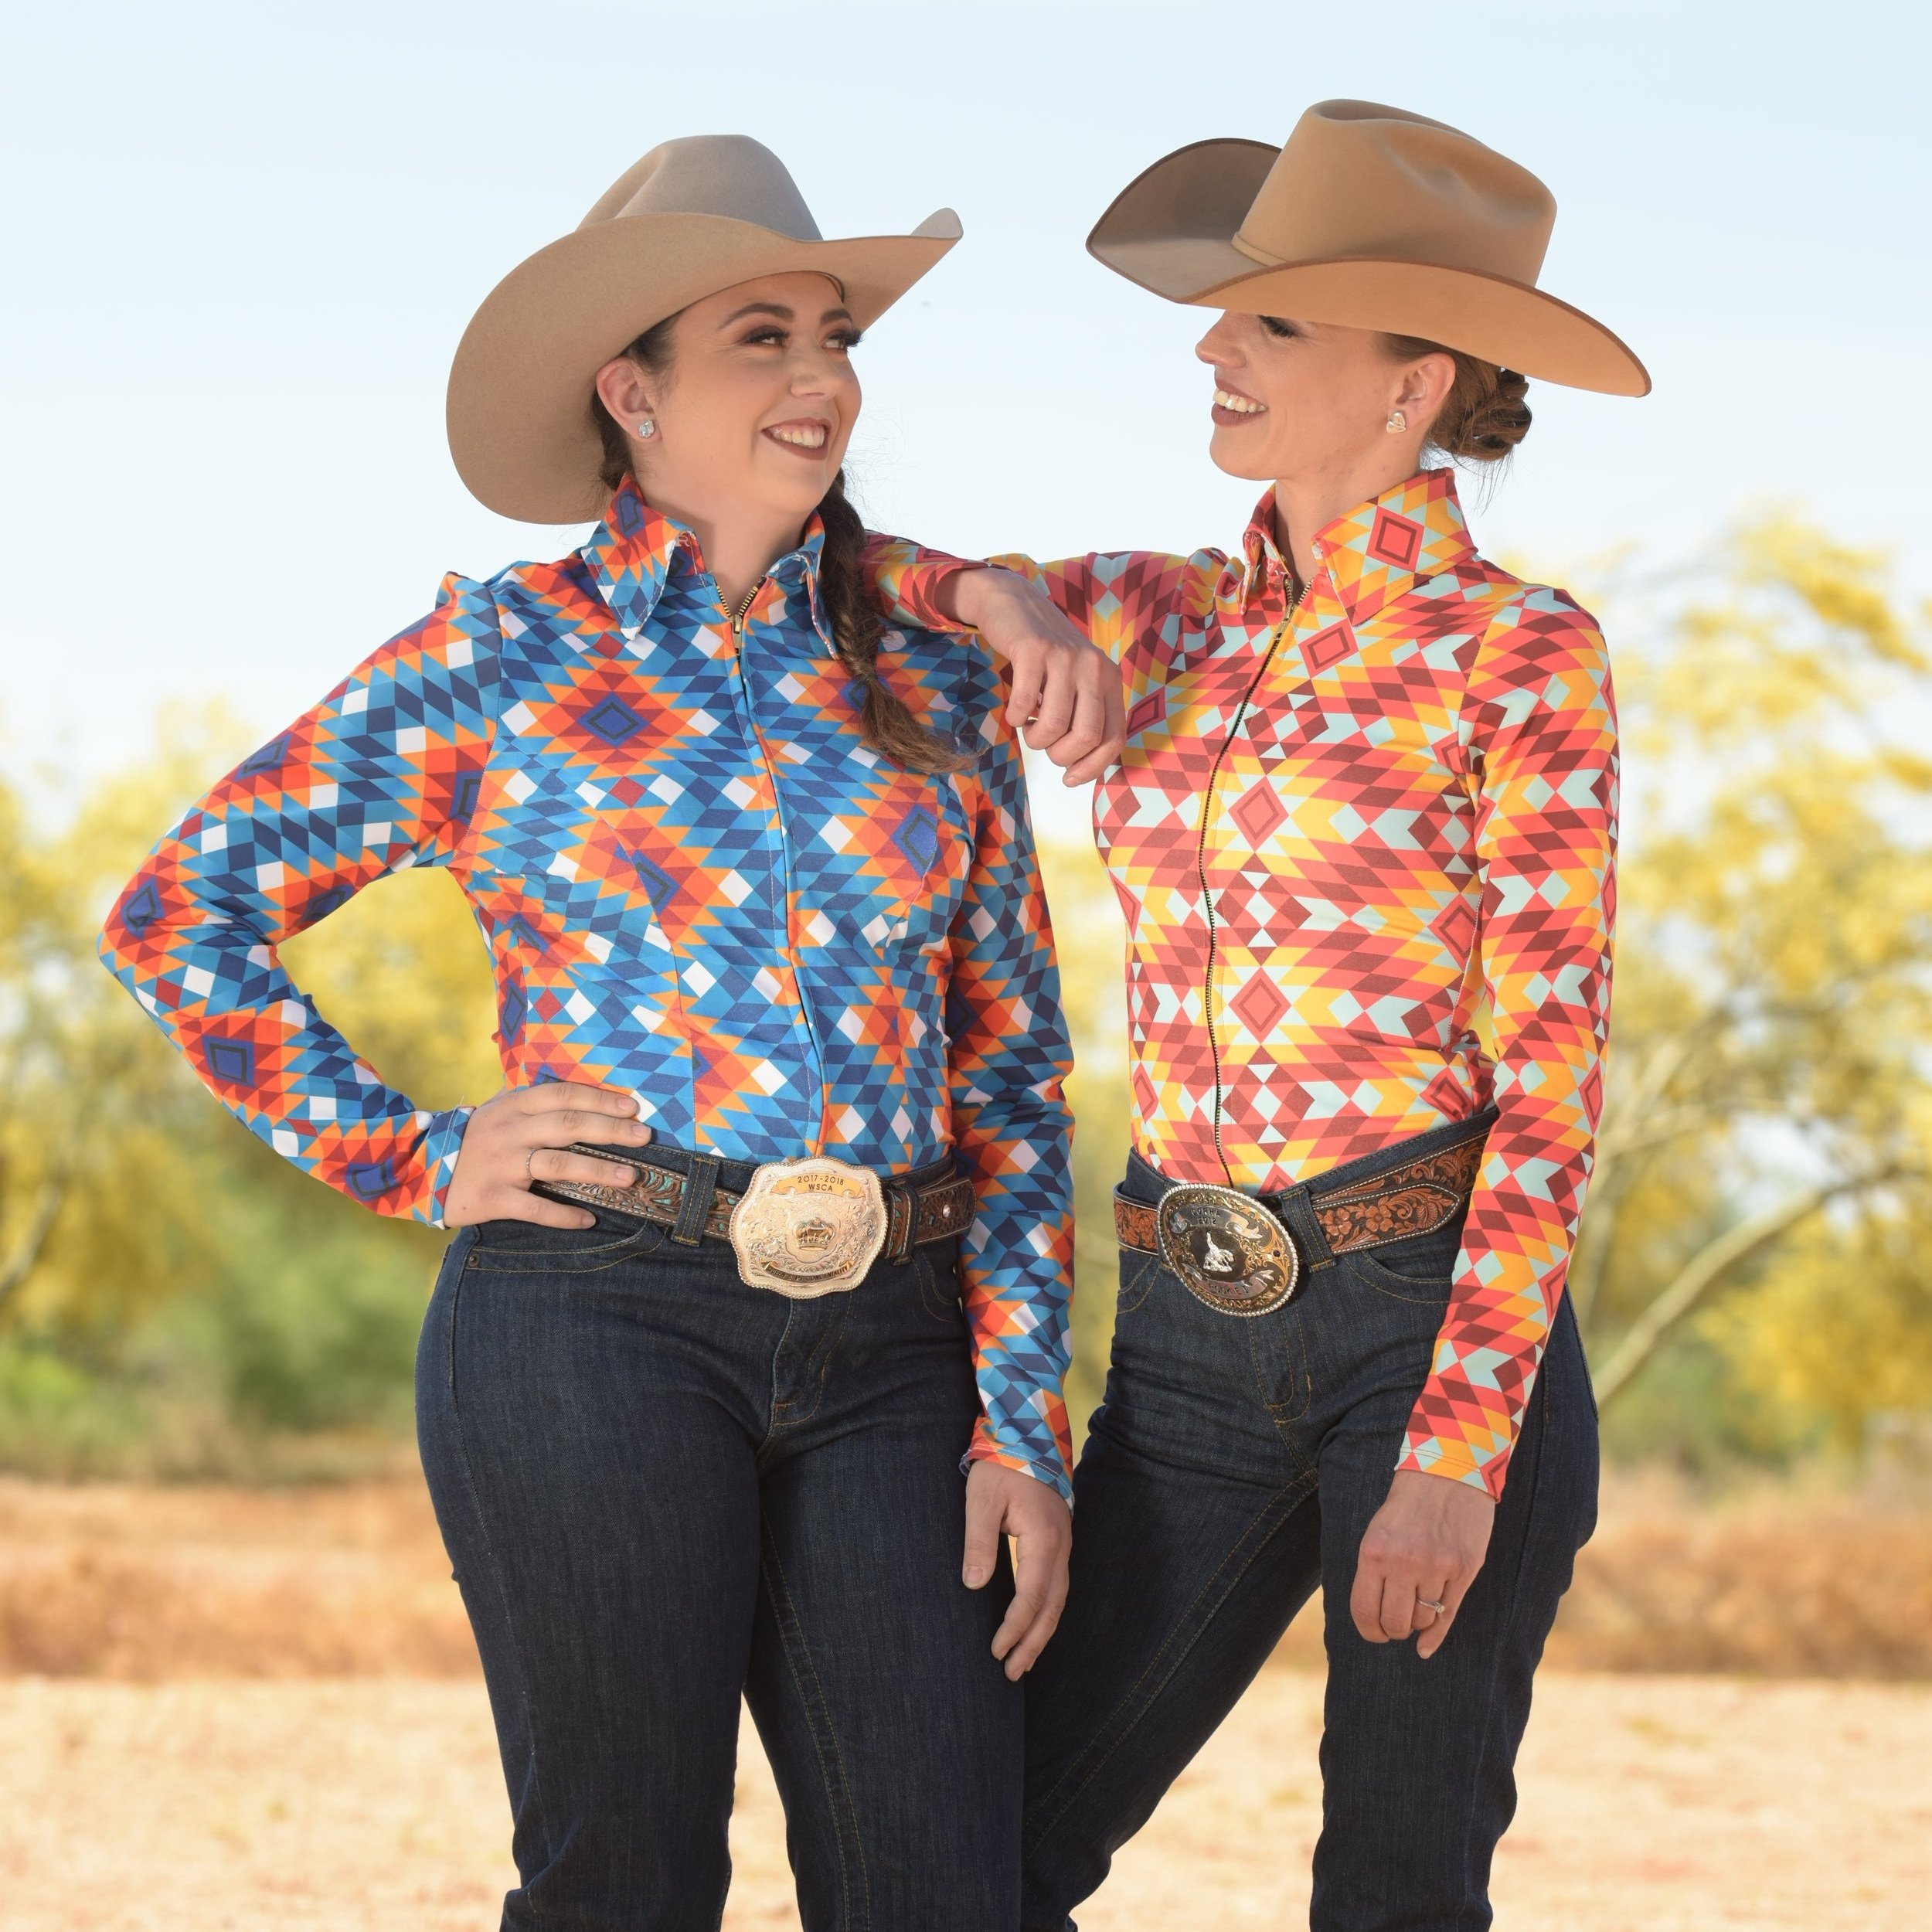 sparkle-ridge-womens-western-wear-with-bling-rodeo-shirts-horse-show-clothing.JPG (Copy) (Copy) (Copy)